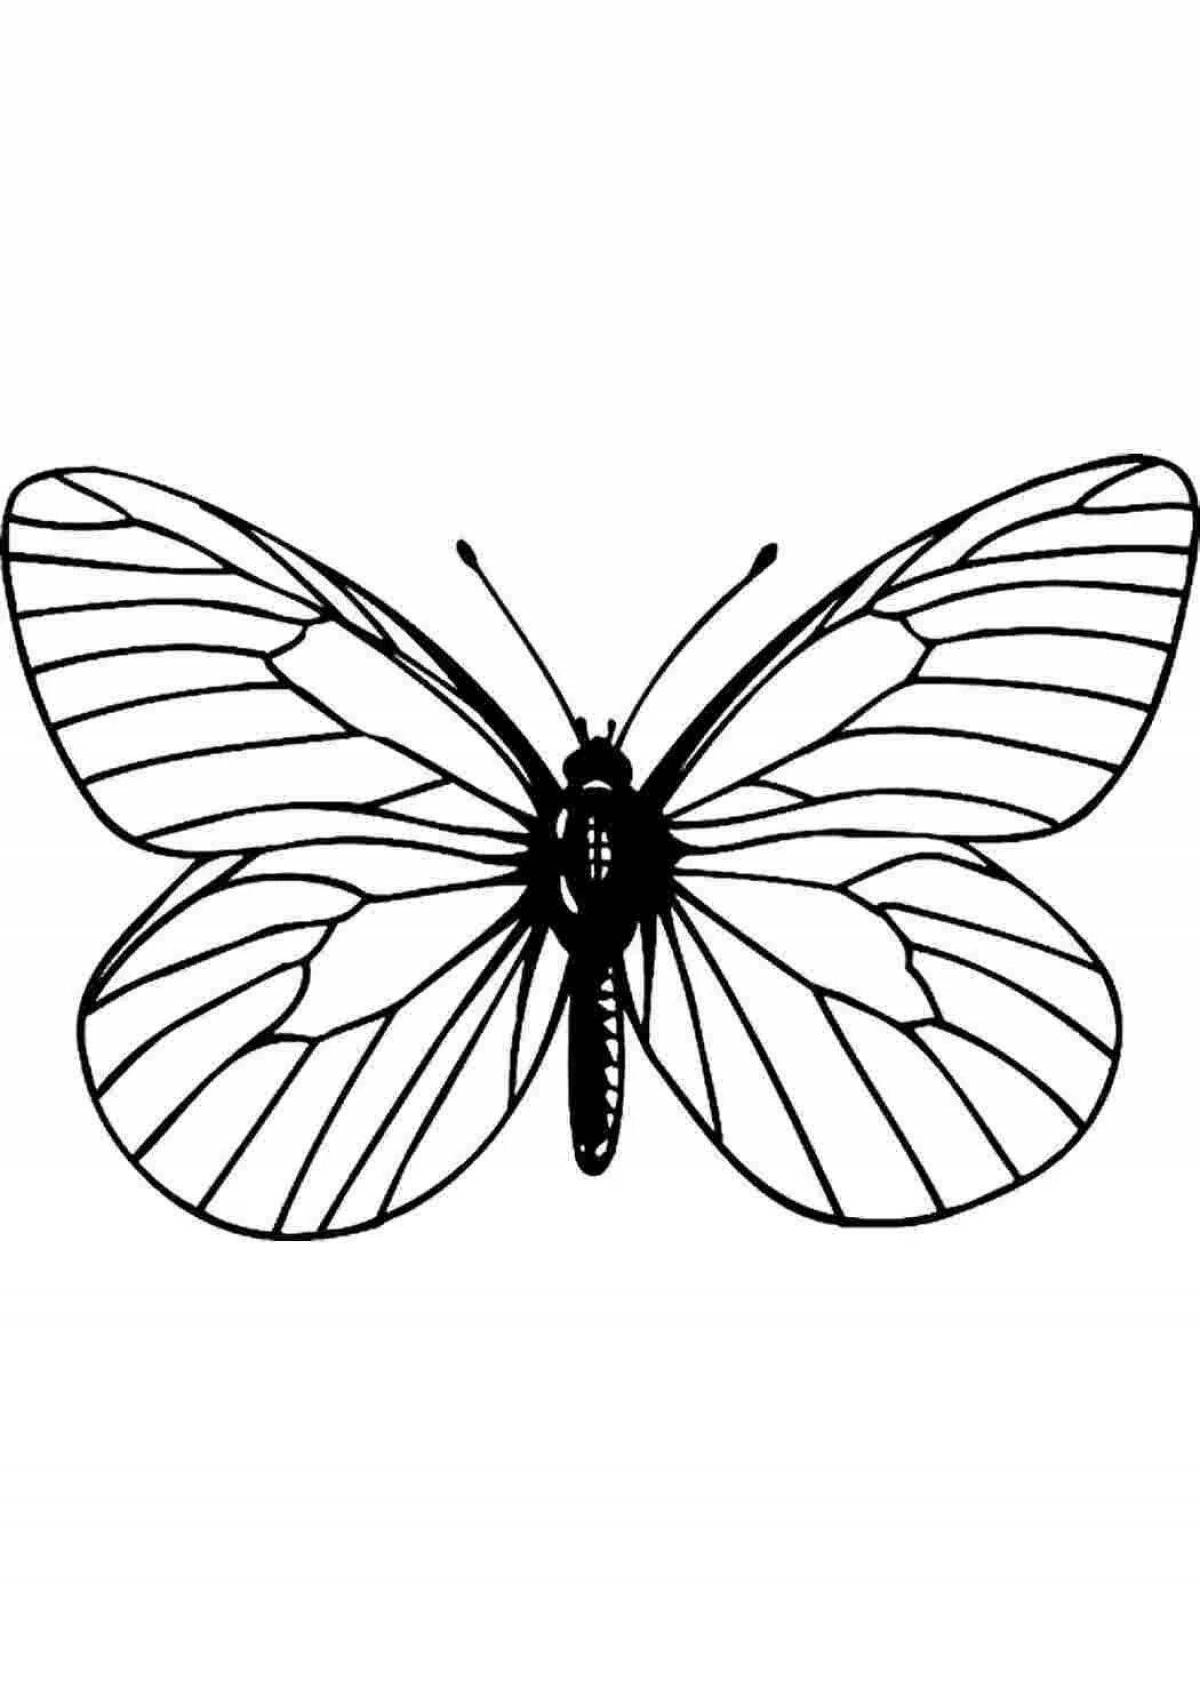 Shiny black and white butterflies coloring book